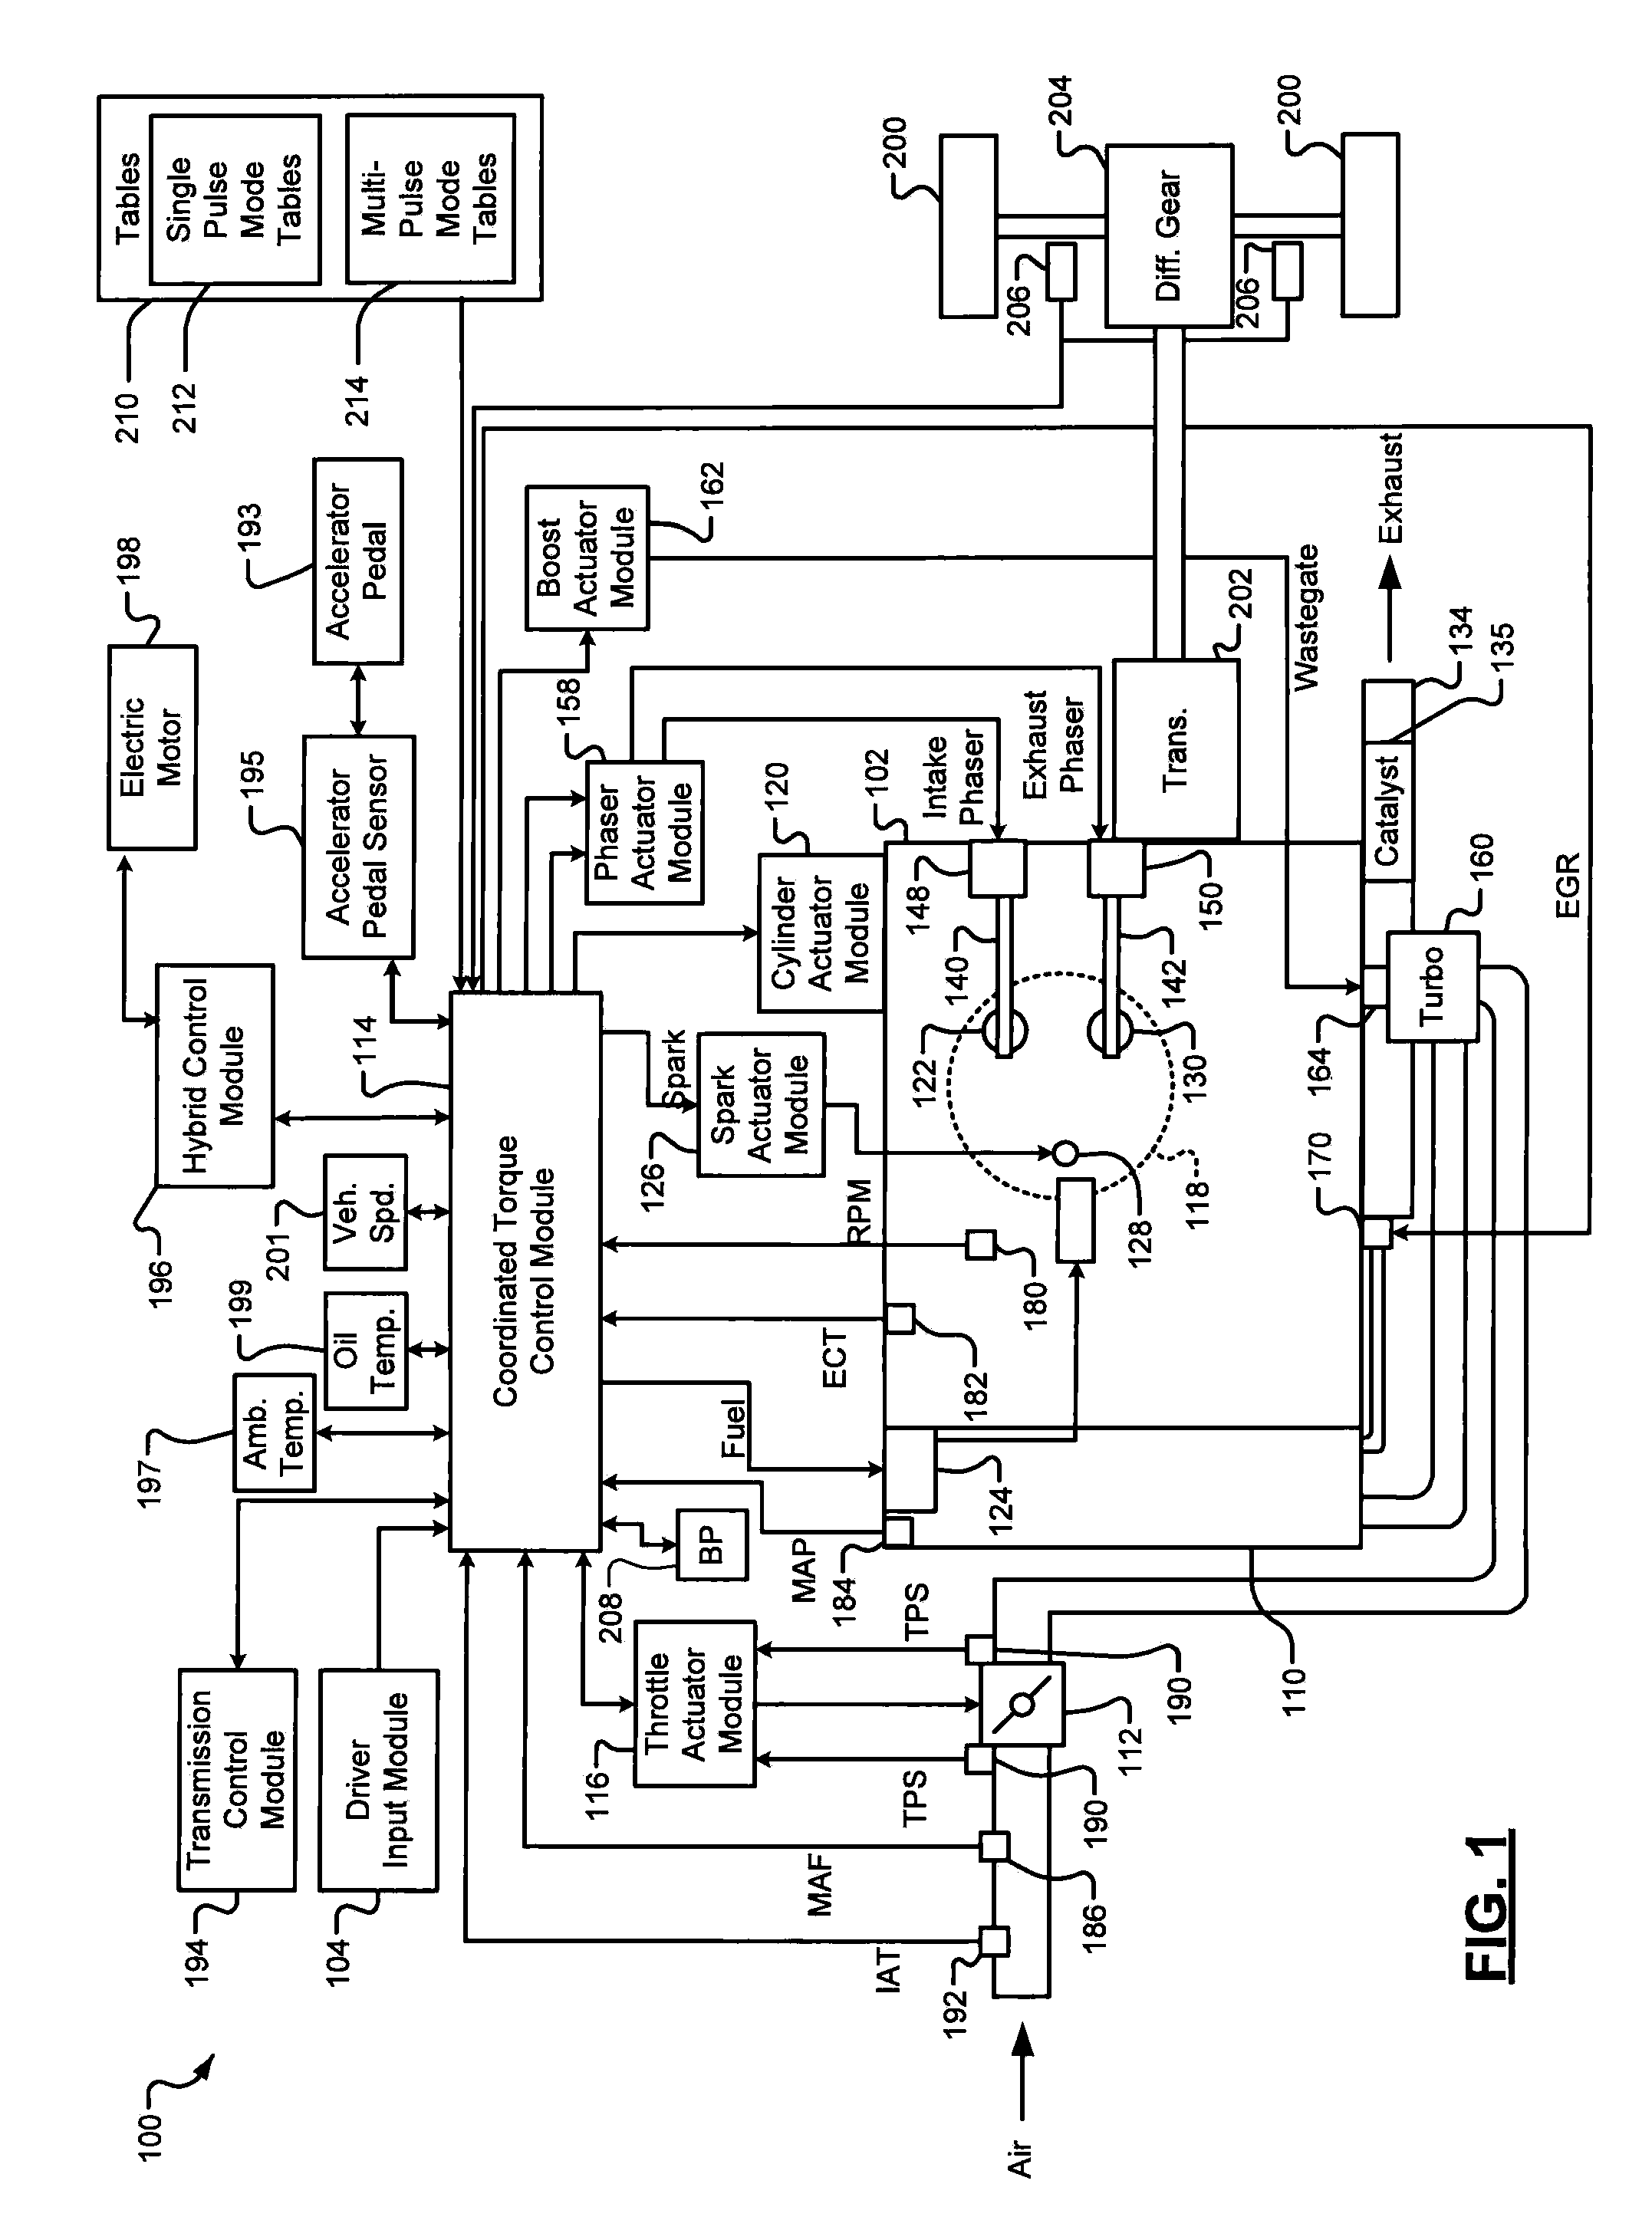 Multi-pulse spark ignition direct injection torque based system